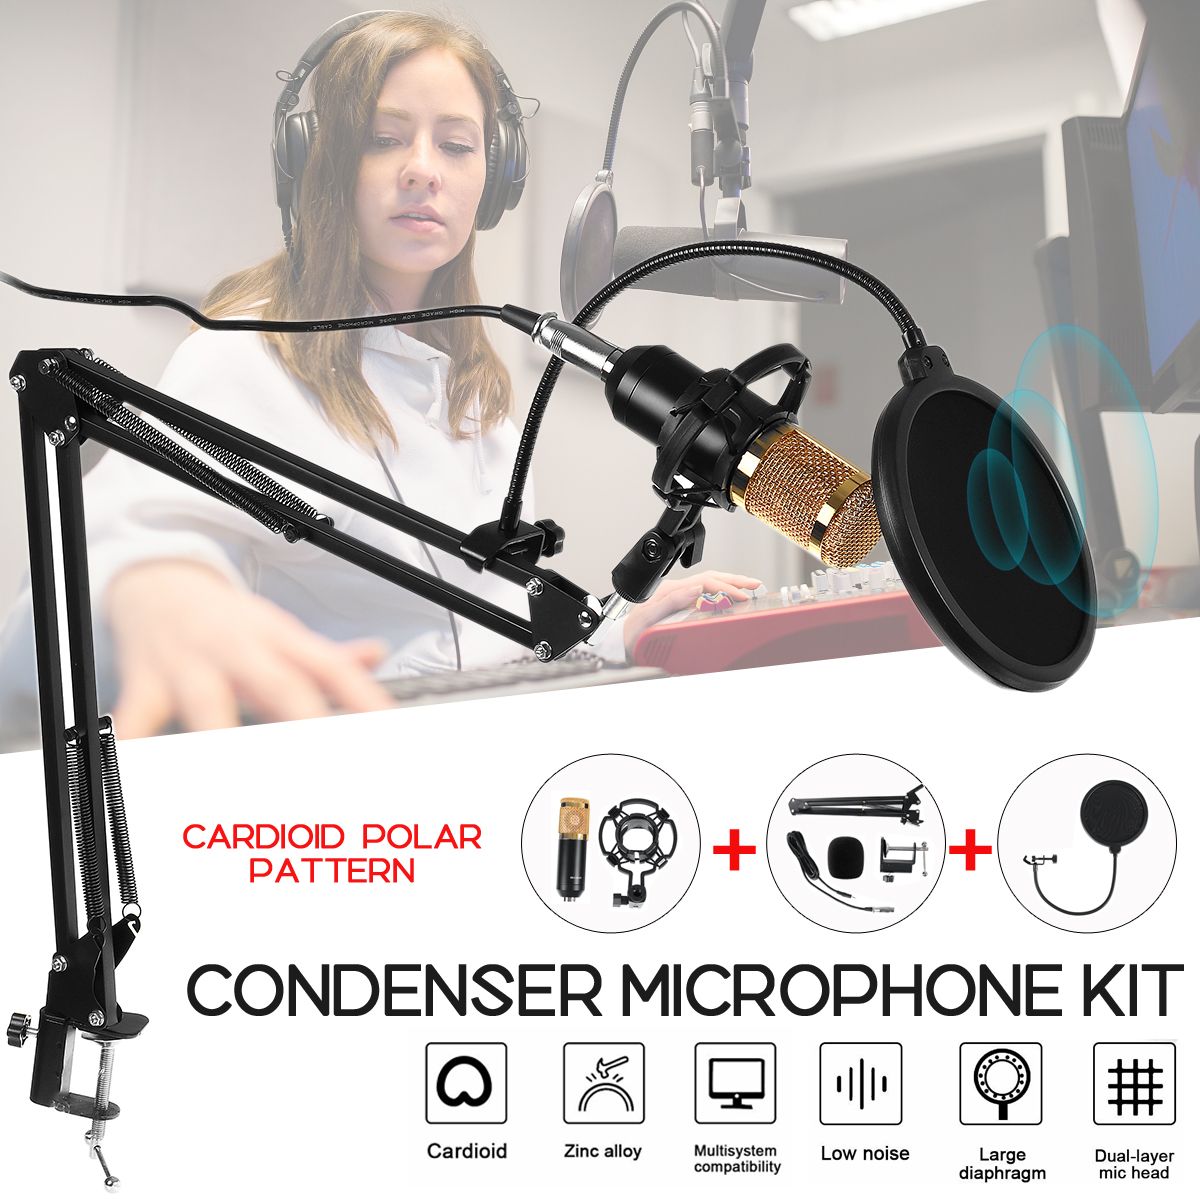 BM-800-Condenser-Microphone-Kit-35mm-Recording-Mic-Tripod-Stand-Set-for-Computer-PC-Karaoke-for-Chat-1736977